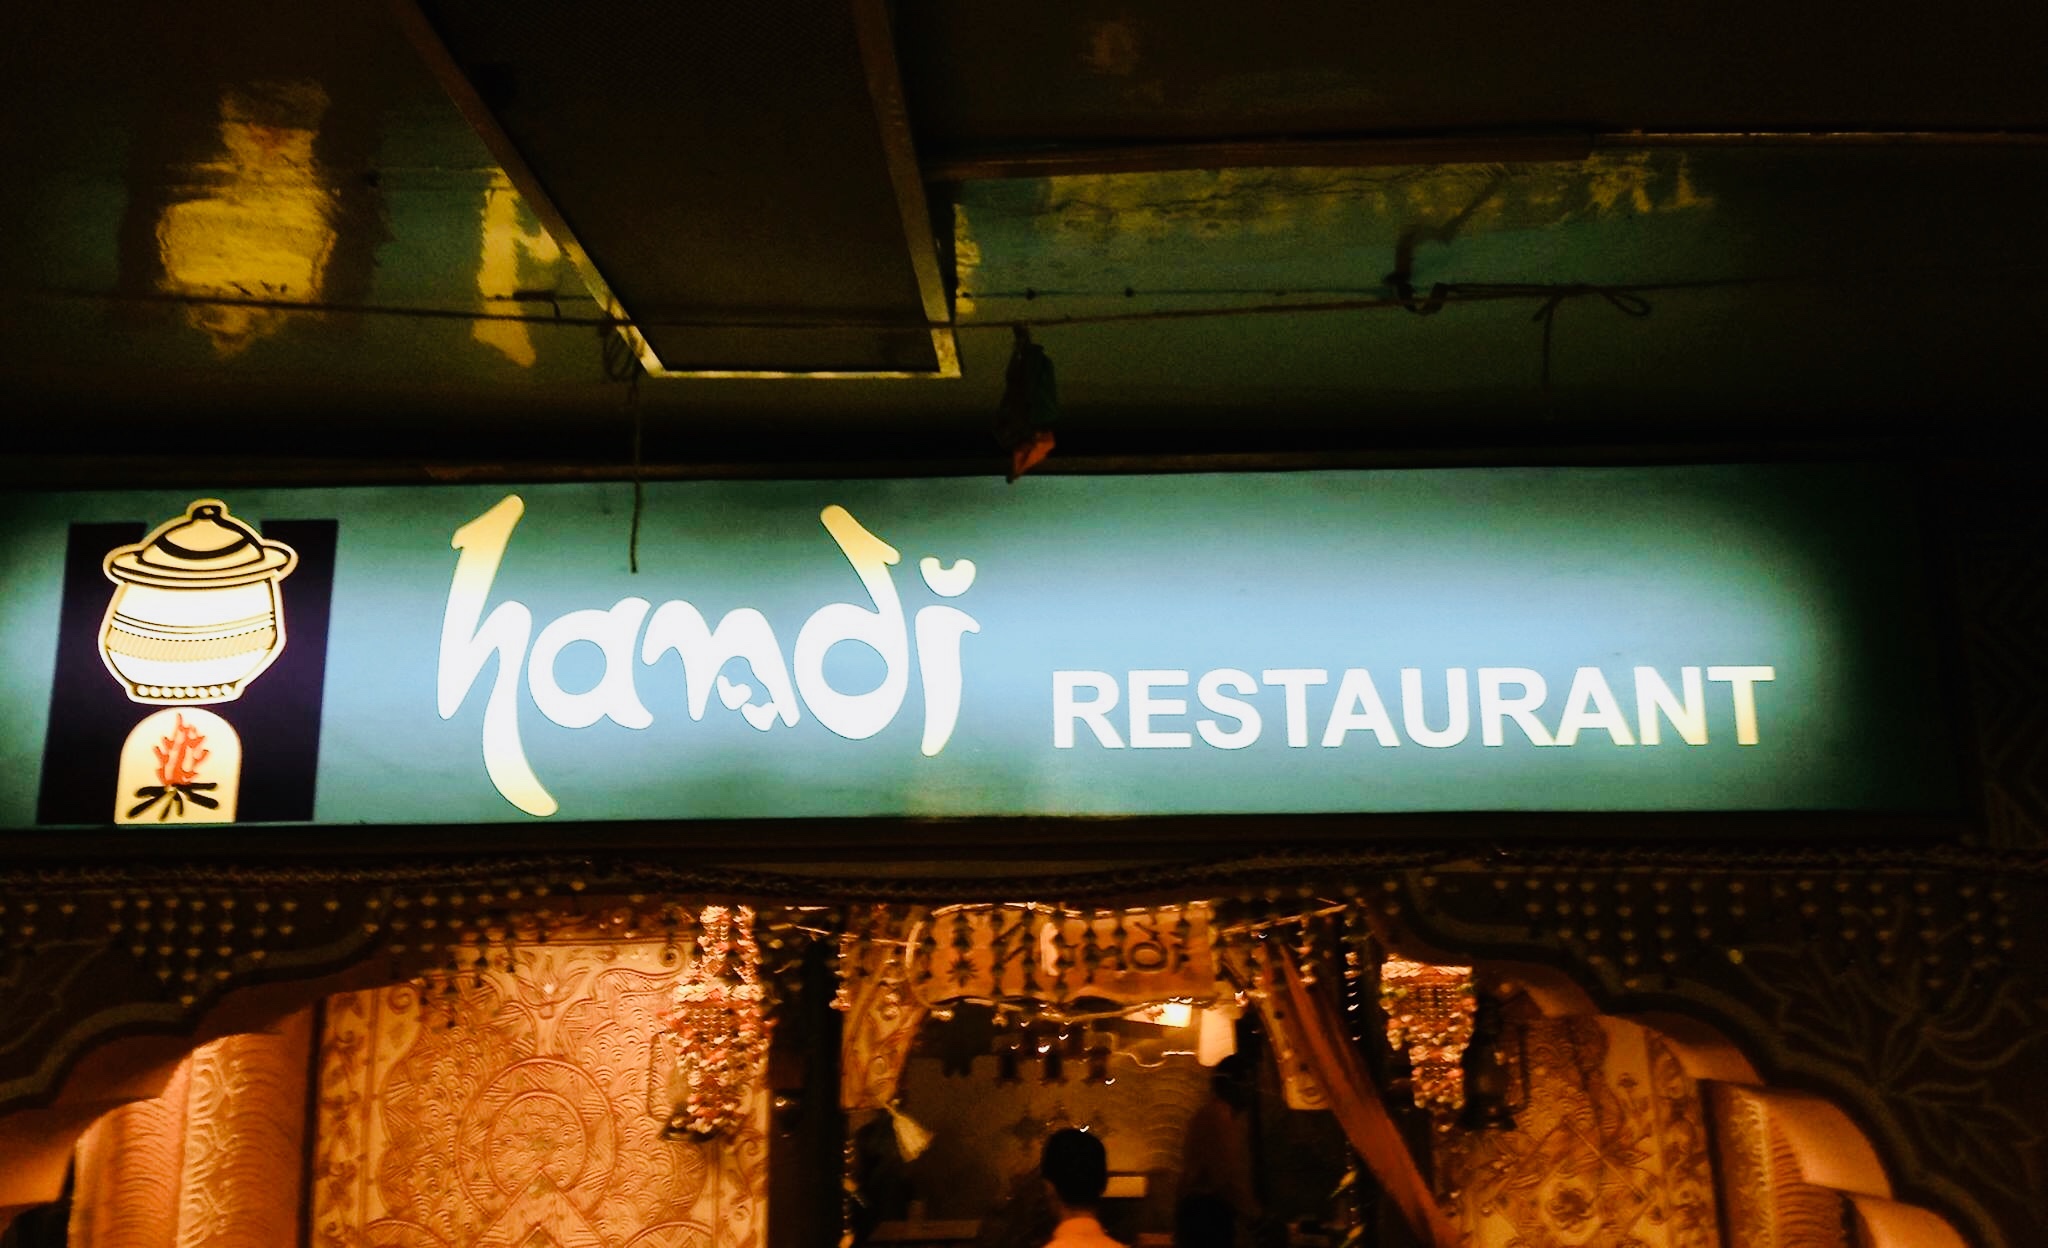 Handi is one of the well known restaurant in Jaipur. It has good non veg food options. Here is Handi restaurant logo.